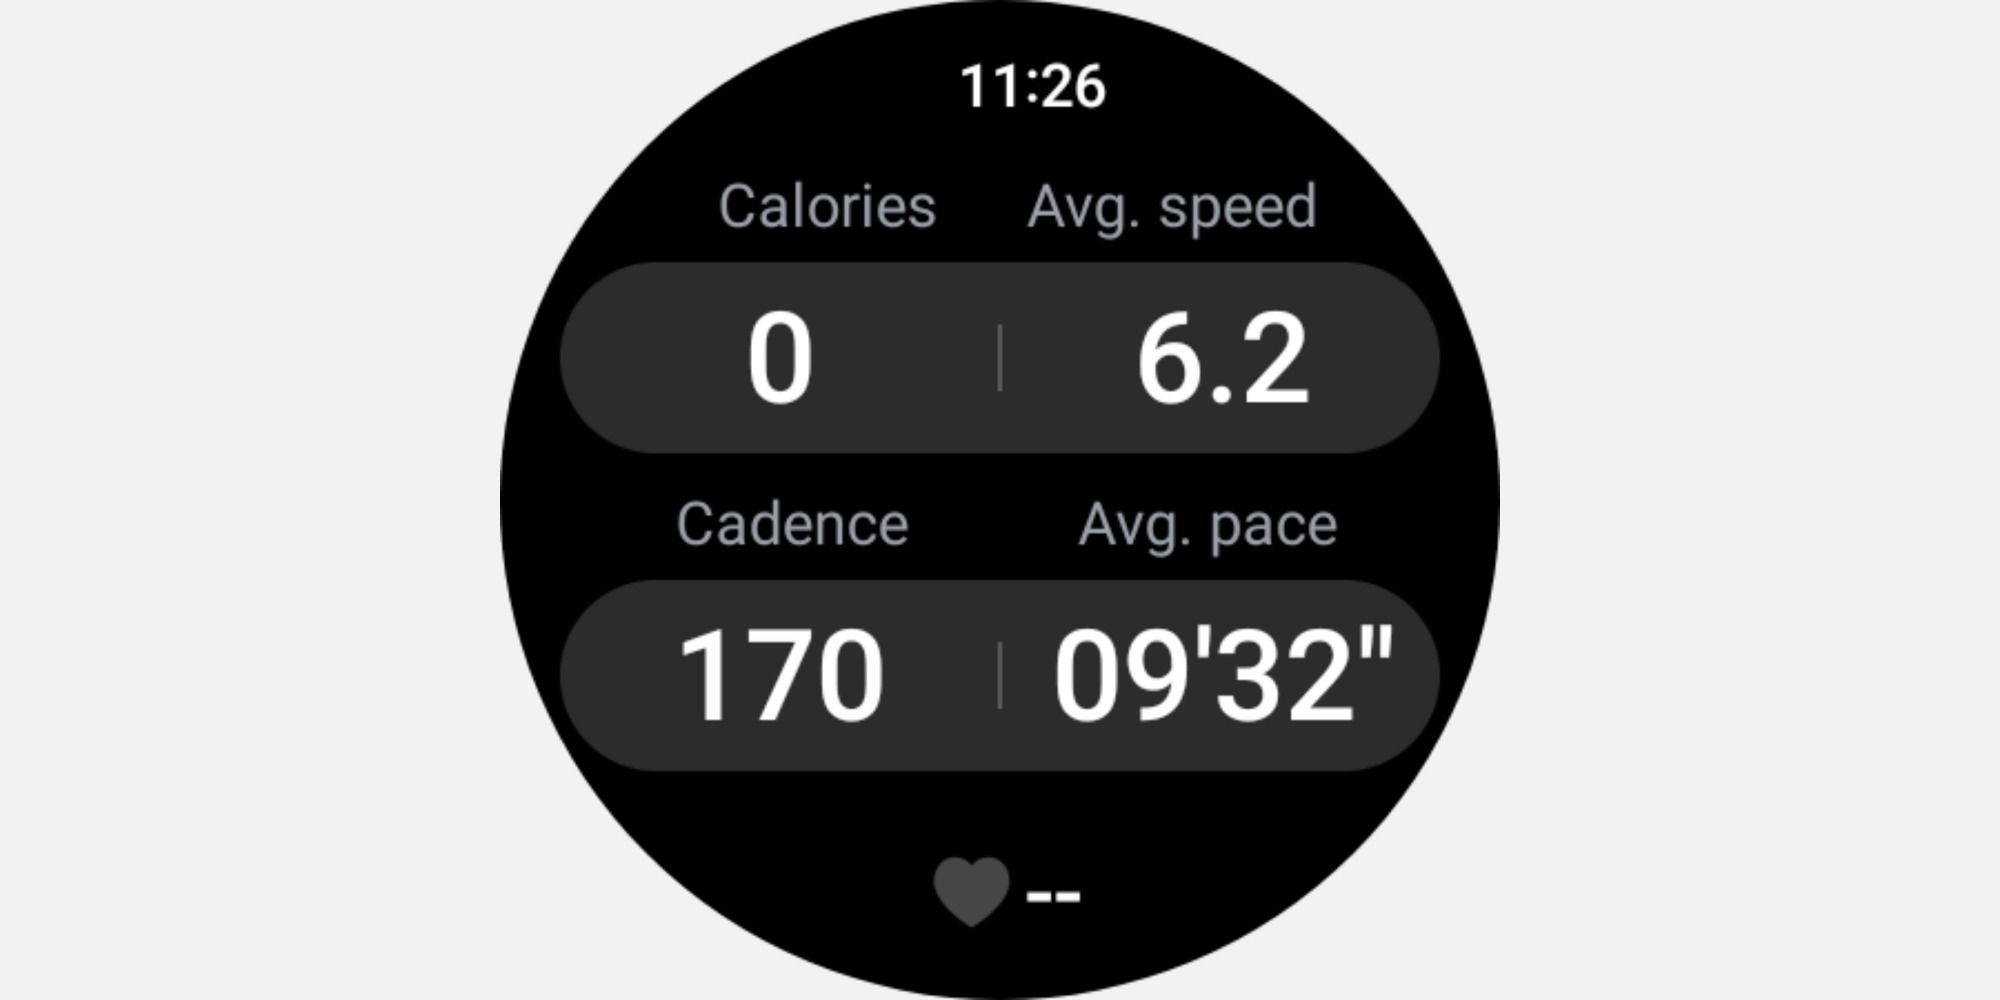 Tracking cadence and running metrics on a smartwatch